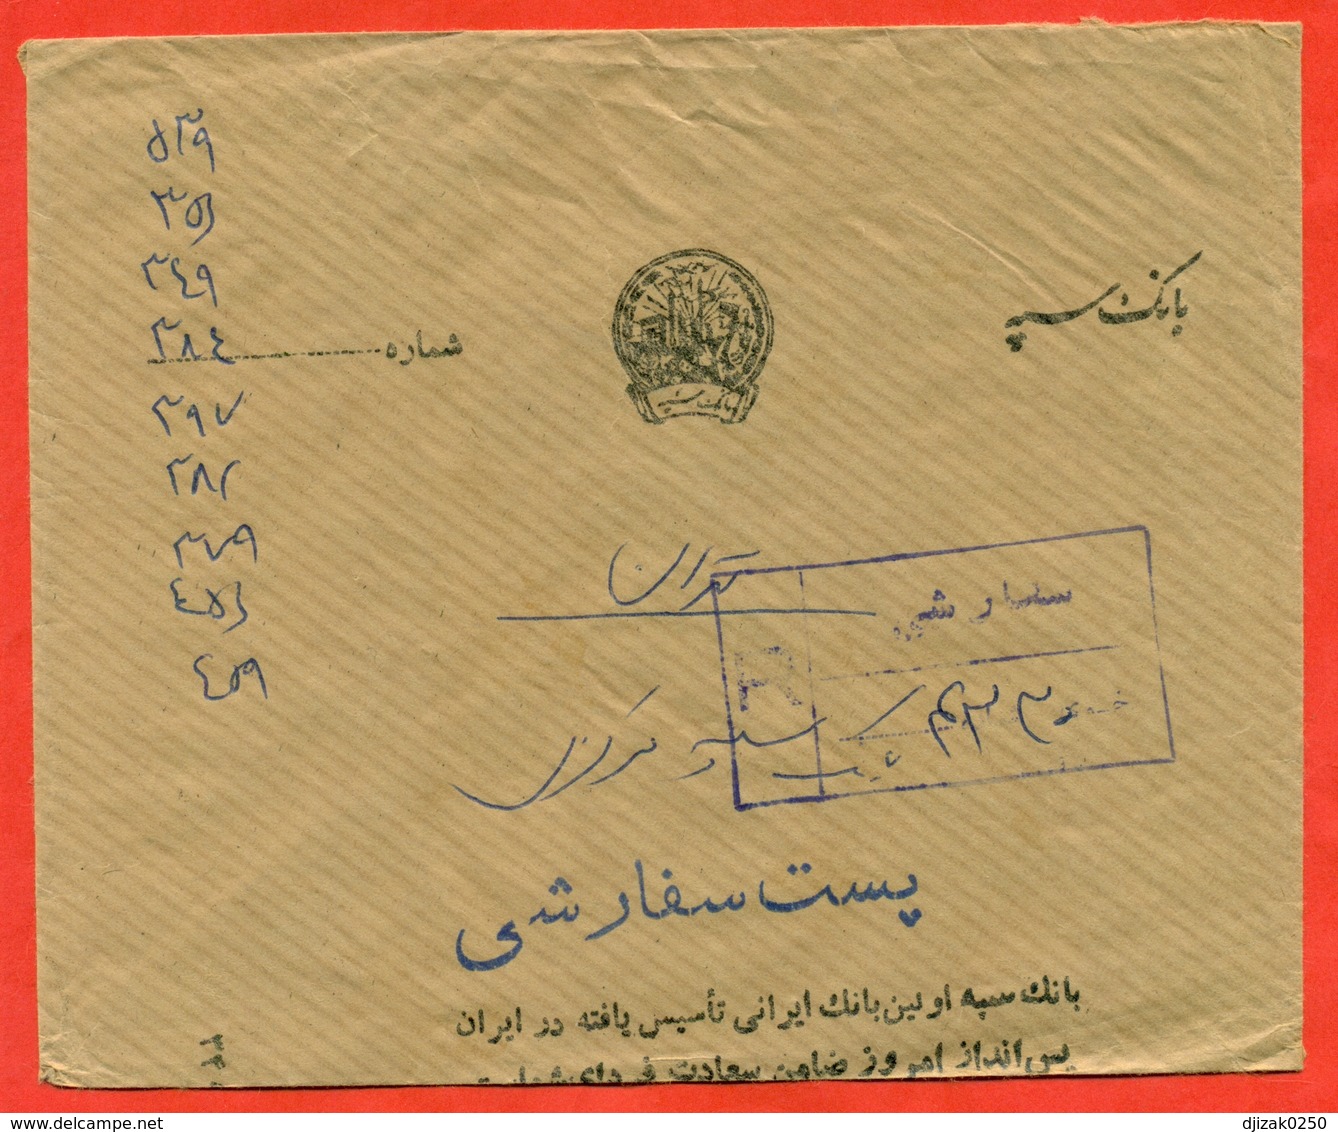 Iran 1975.Oil. Registered Envelope Passed The Mail. - Irán